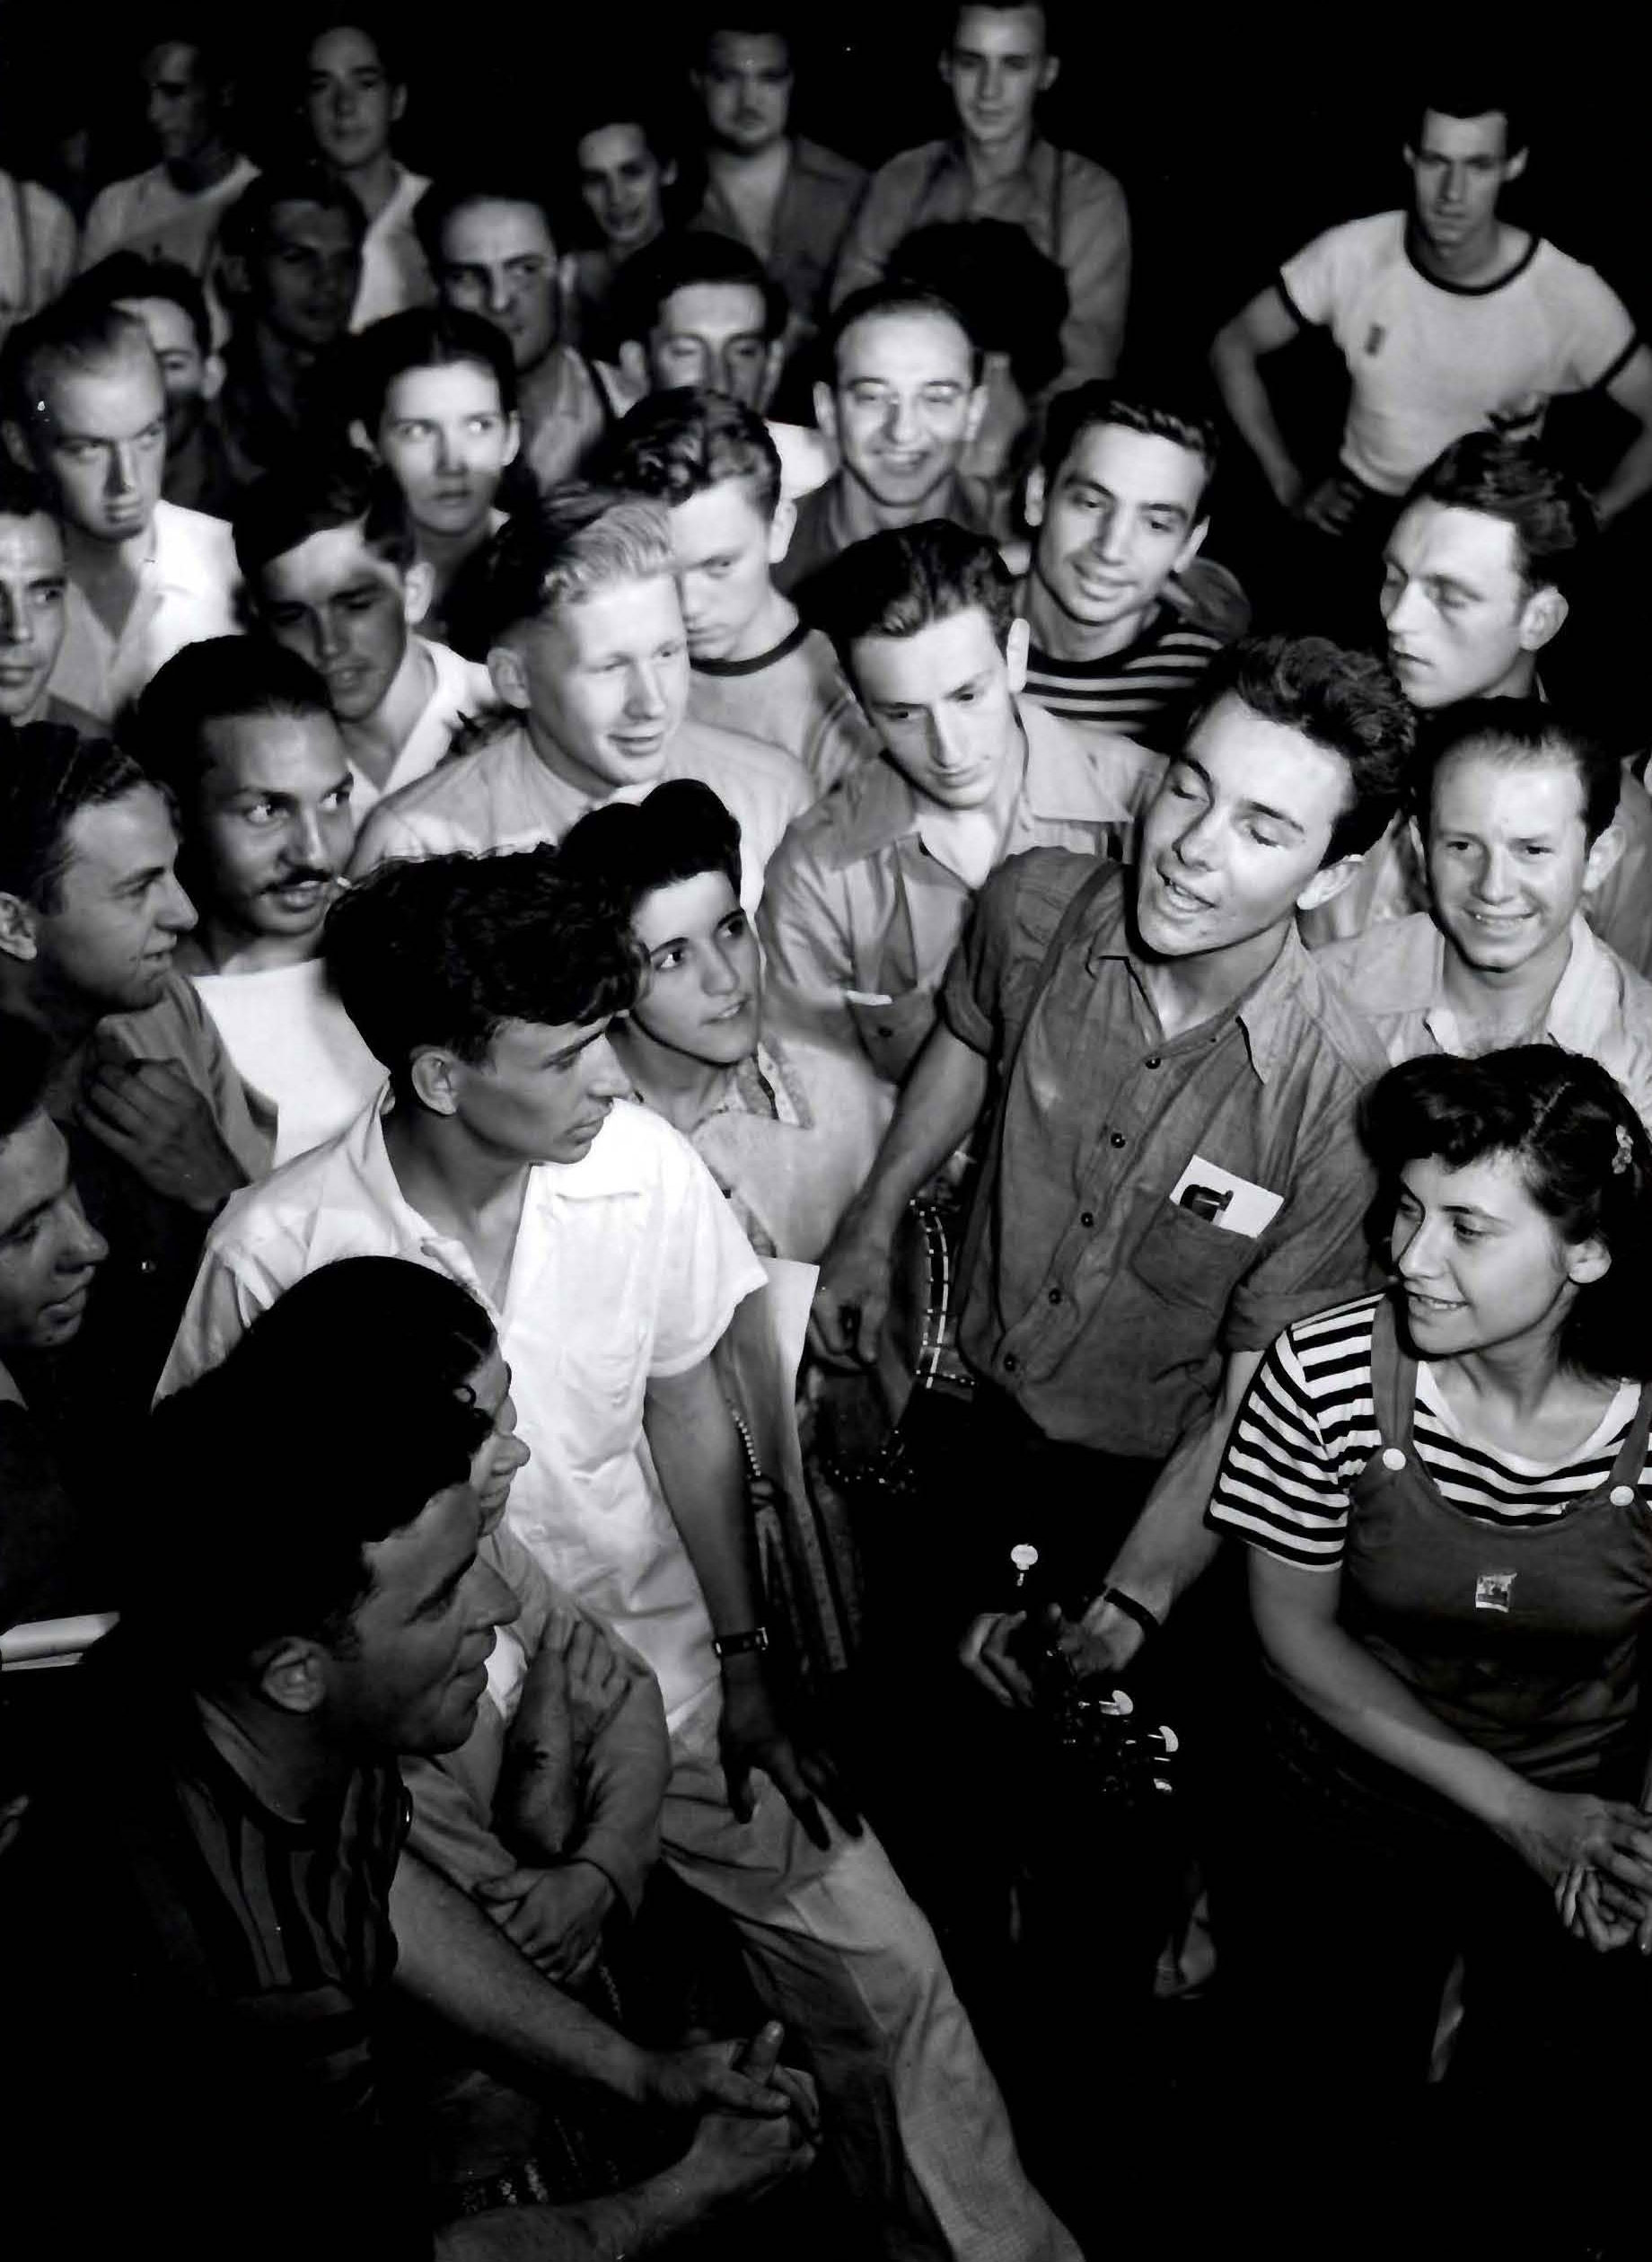 Pete Seeger surrounded by fans (undated)